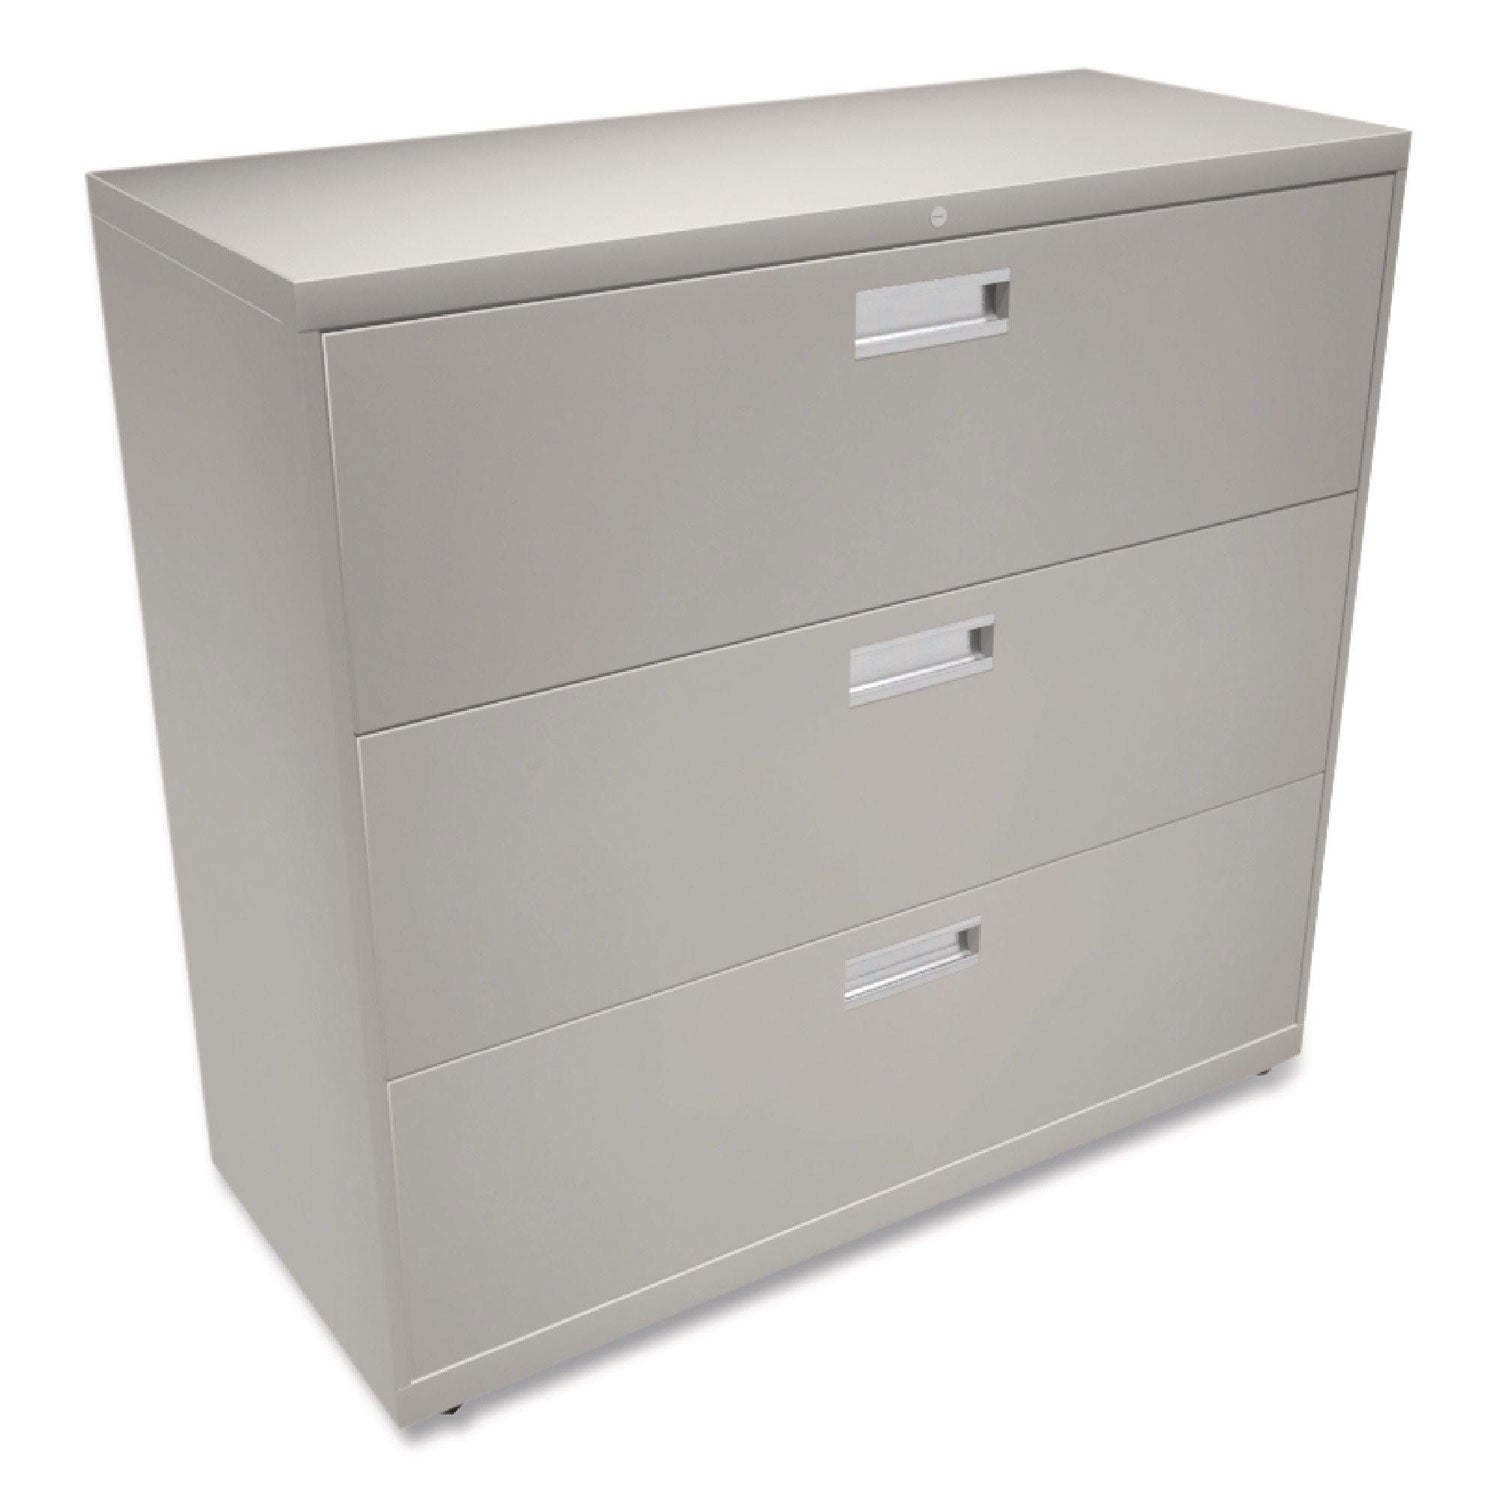 Brigade 600 Series Lateral File, 3 Legal/Letter-Size File Drawers, Light Gray, 42" x 18" x 39.13 - 